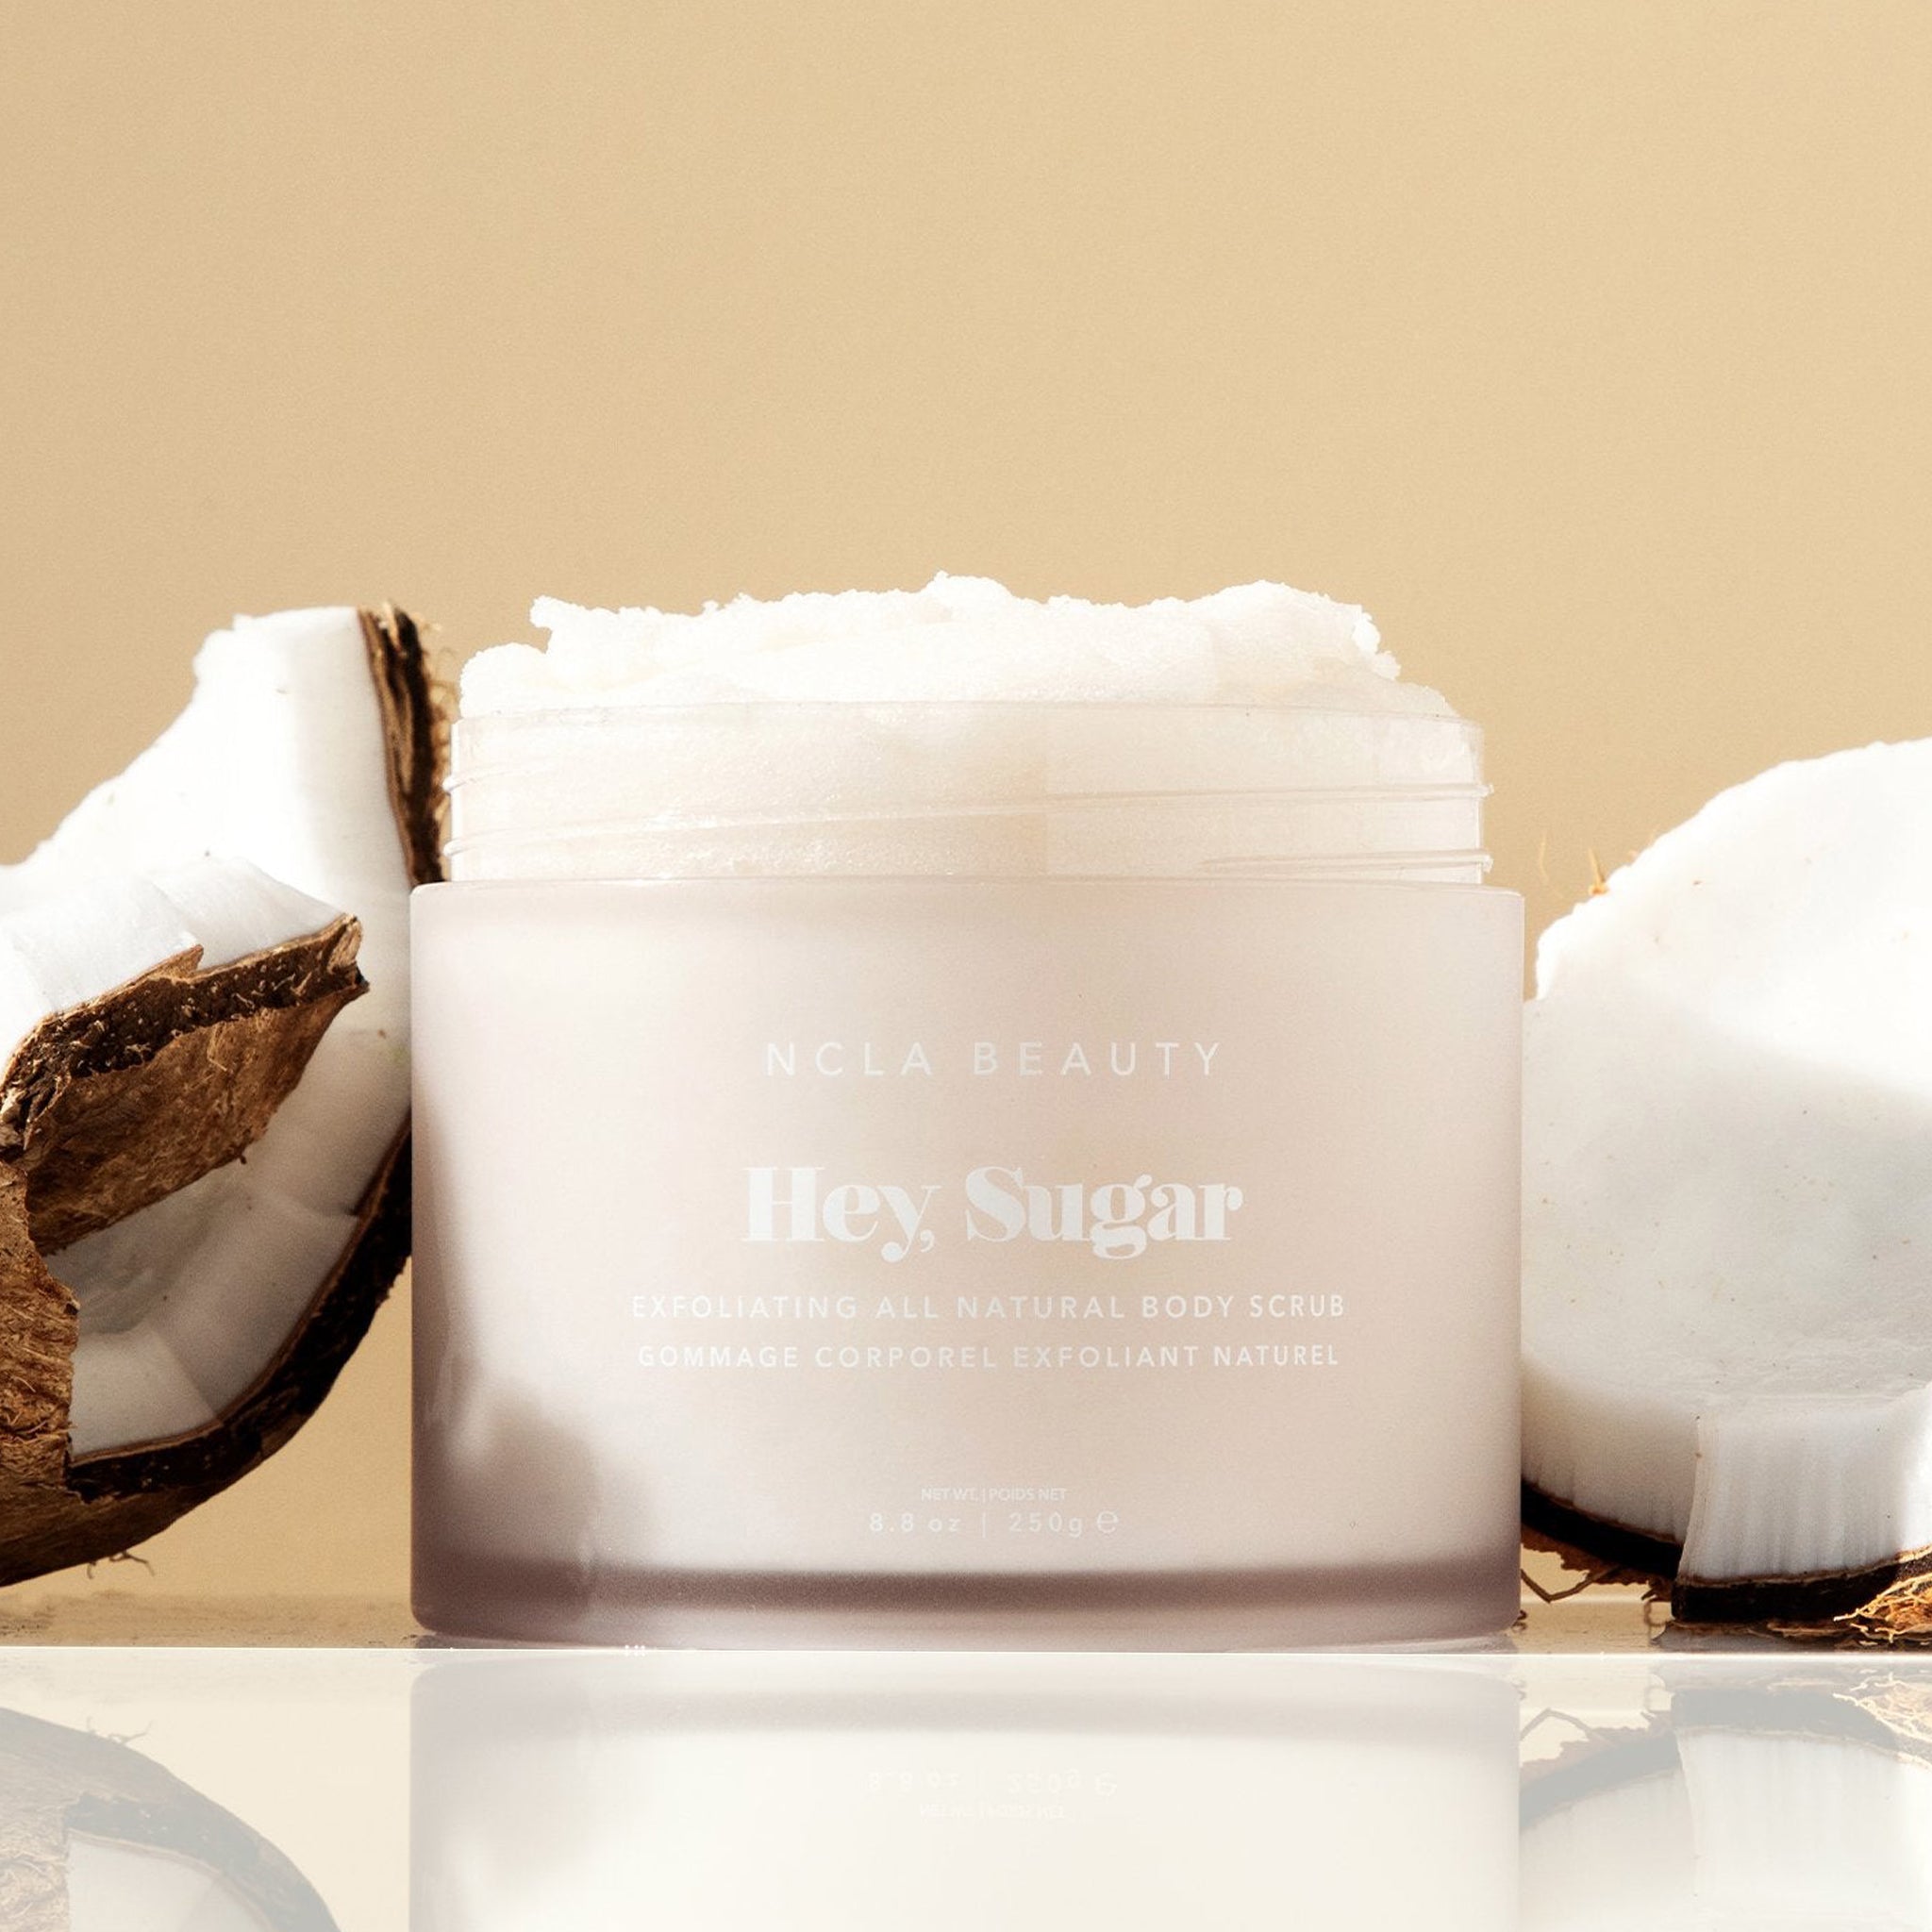 On a tan background is a container of white colored body scrub with text on the front that reads, "Hey, Sugar".